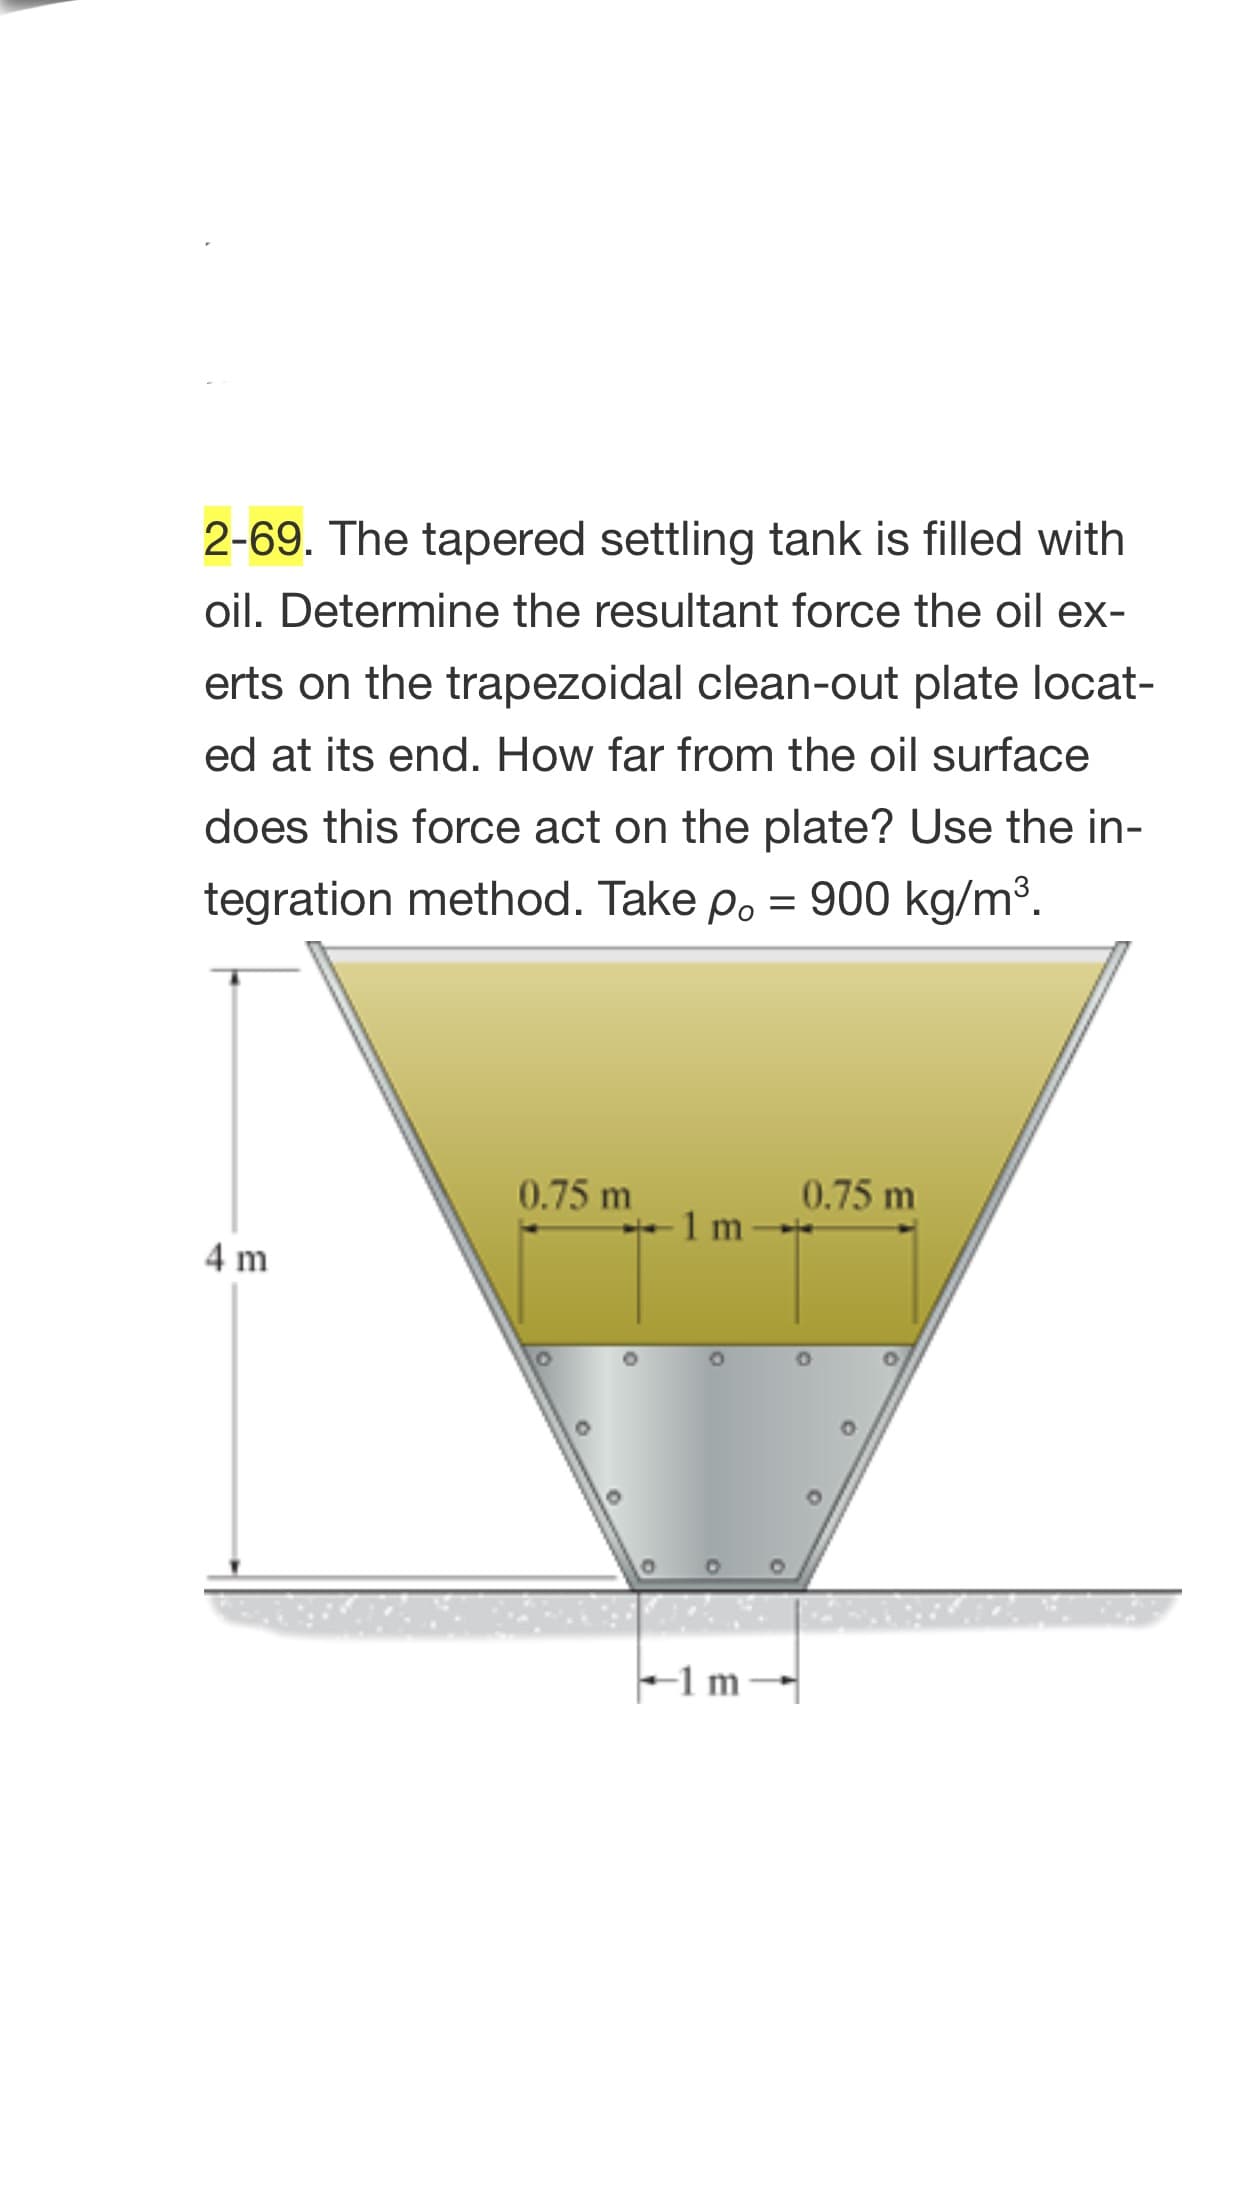 2-69. The tapered settling tank is filled with
oil. Determine the resultant force the oil ex-
erts on the trapezoidal clean-out plate locat-
ed at its end. How far from the oil surface
does this force act on the plate? Use the in-
tegration method. Take p. = 900 kg/m³.
0.75 m
0.75 m
4 m
-1 m-
01
